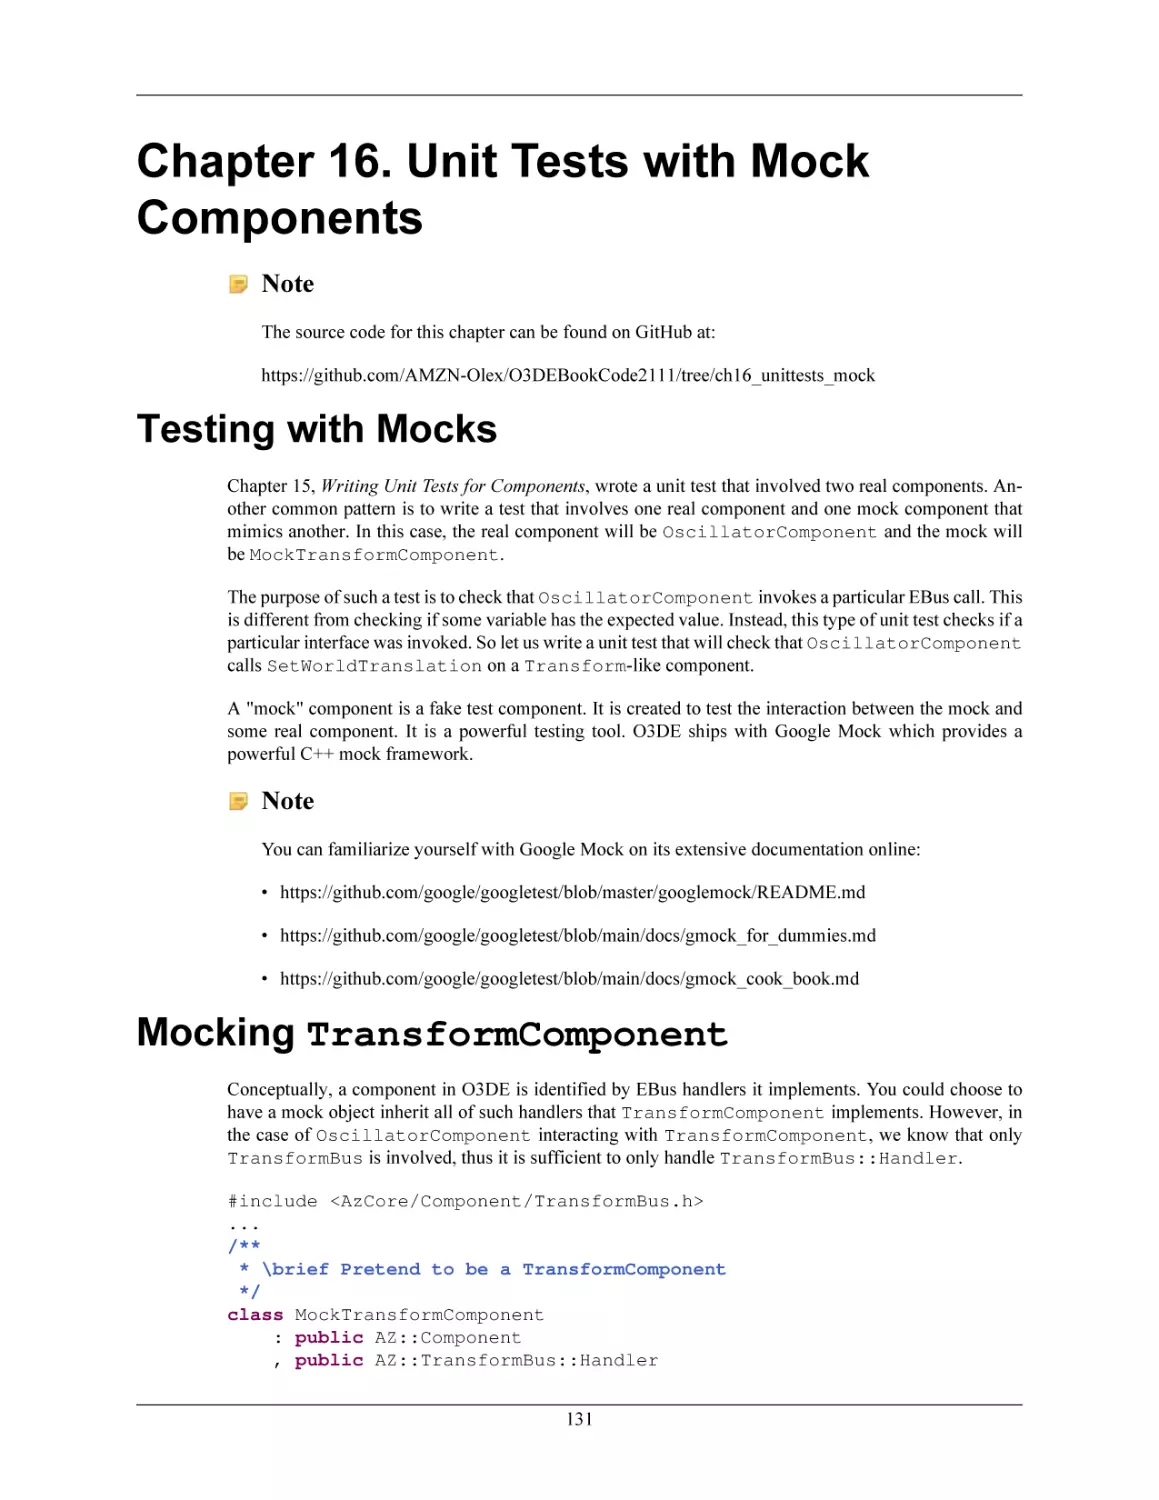 Chapter 16. Unit Tests with Mock Components
Testing with Mocks
Mocking TransformComponent